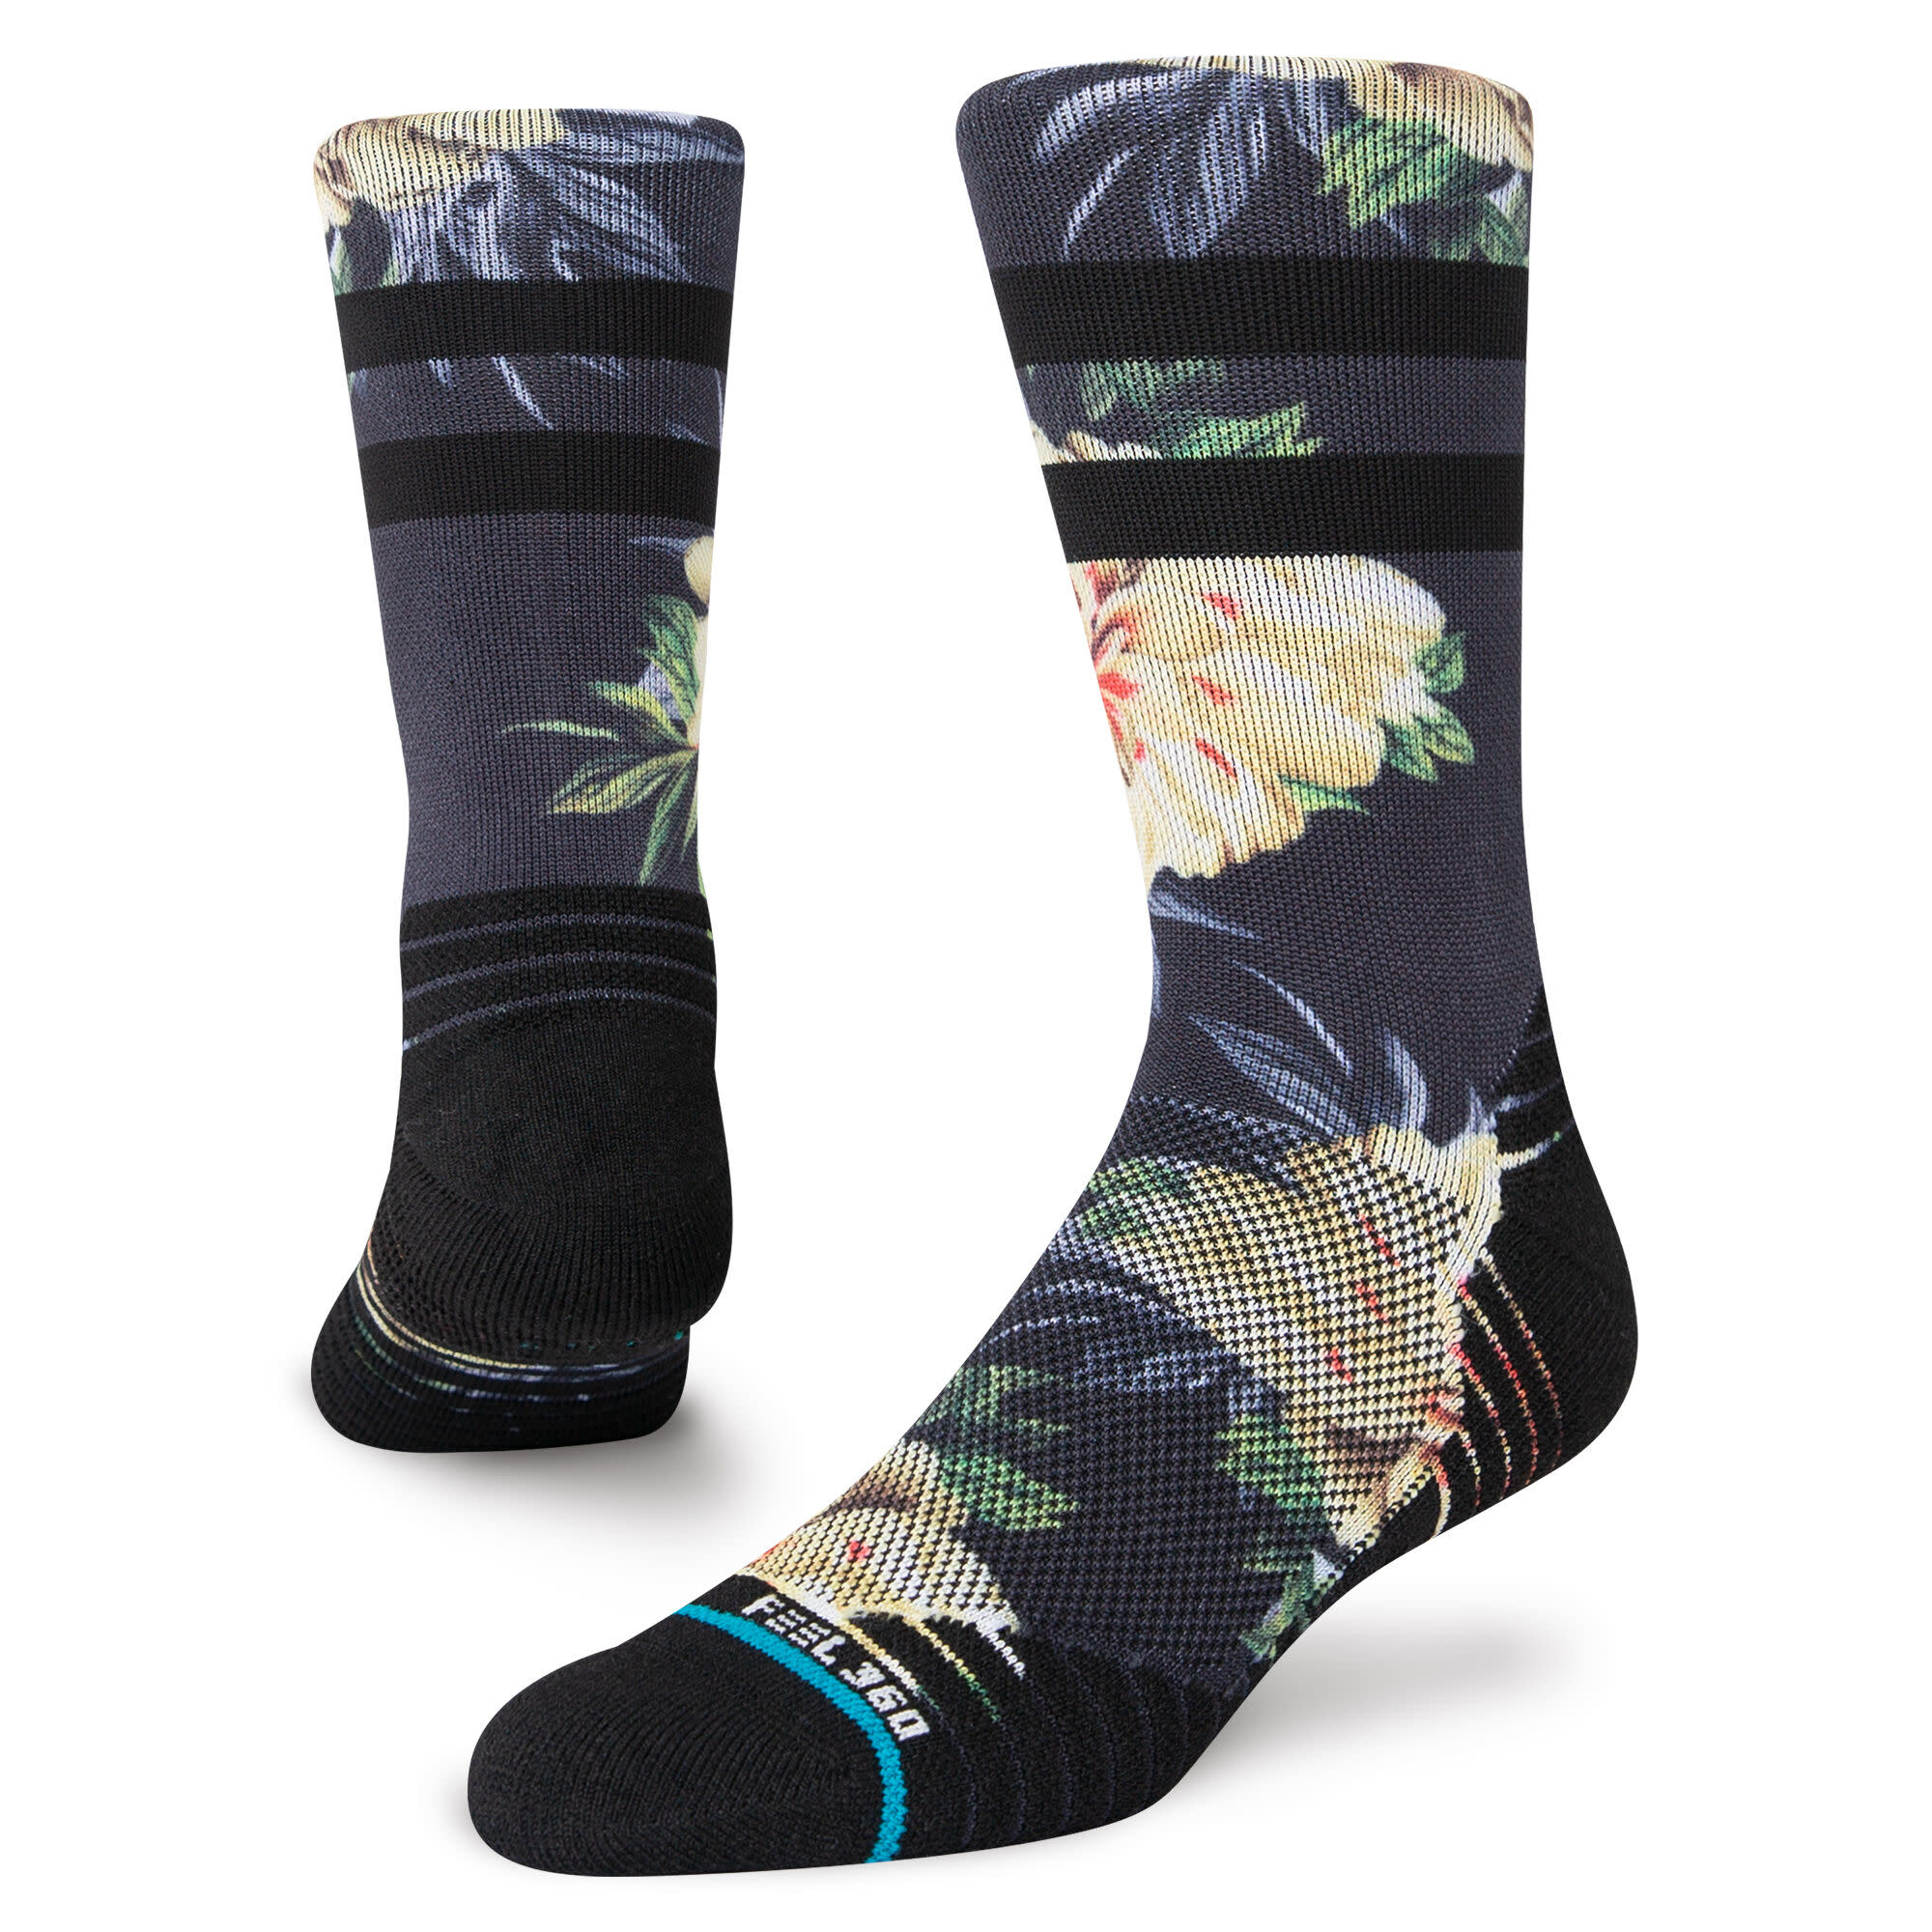 Stance socks casual/Athletic